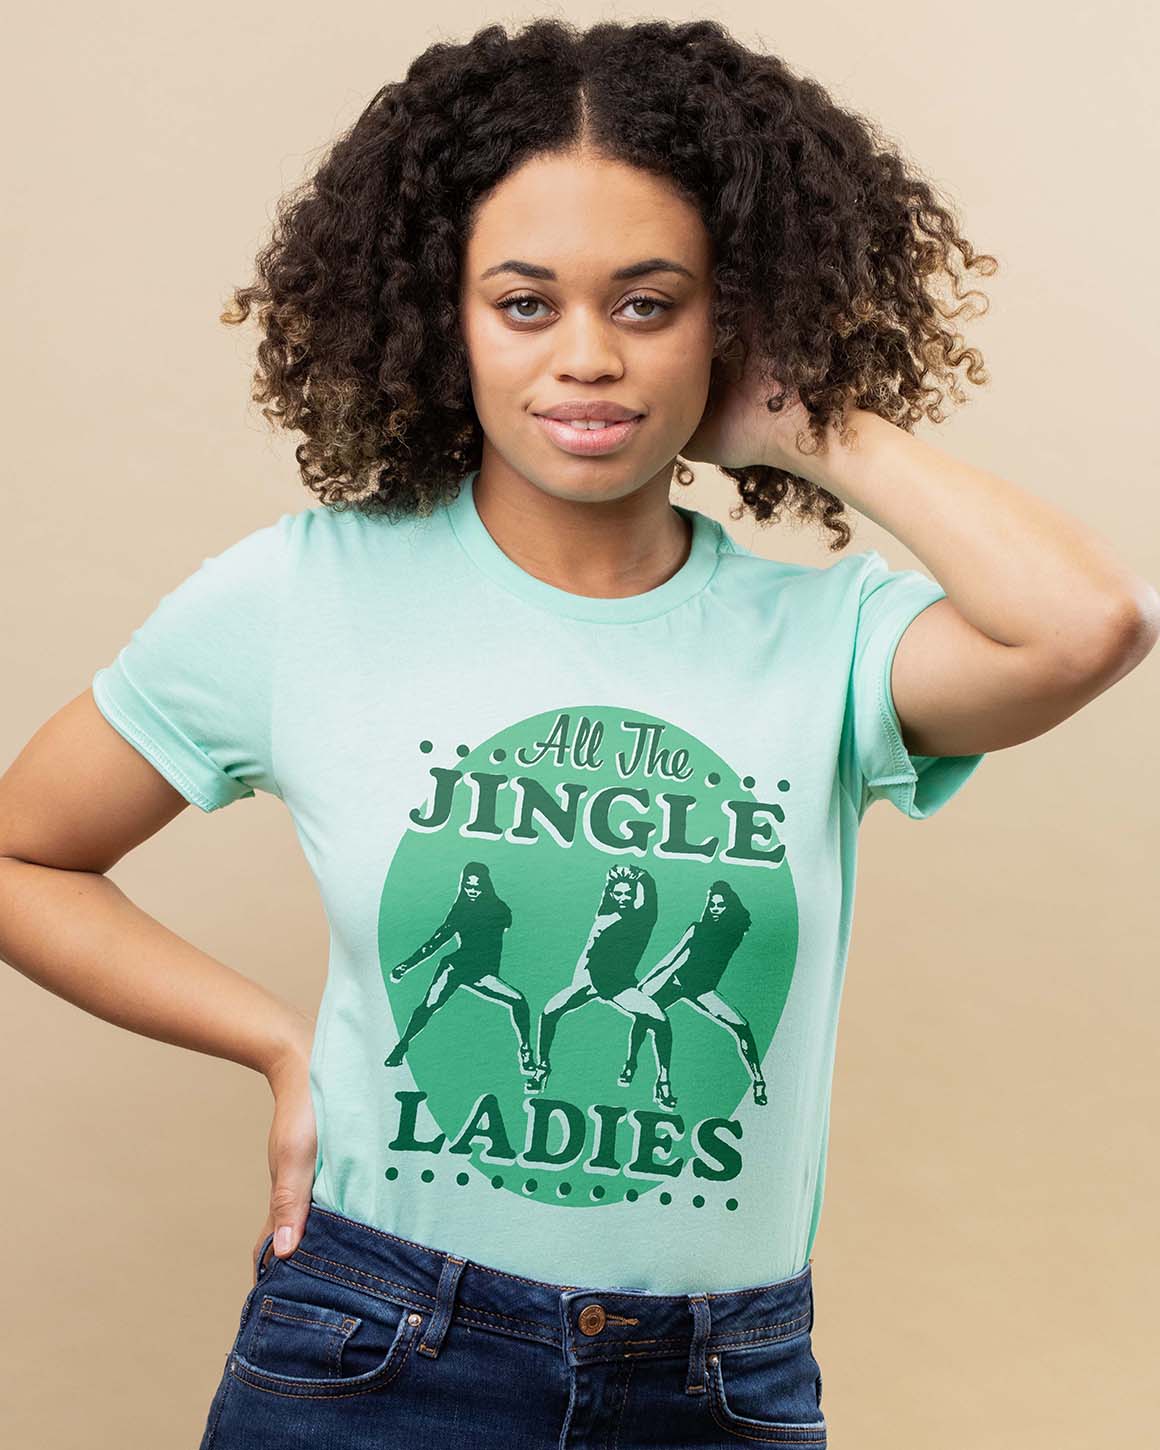 All the jingle ladies Christmas shirt inspired by Beyonce